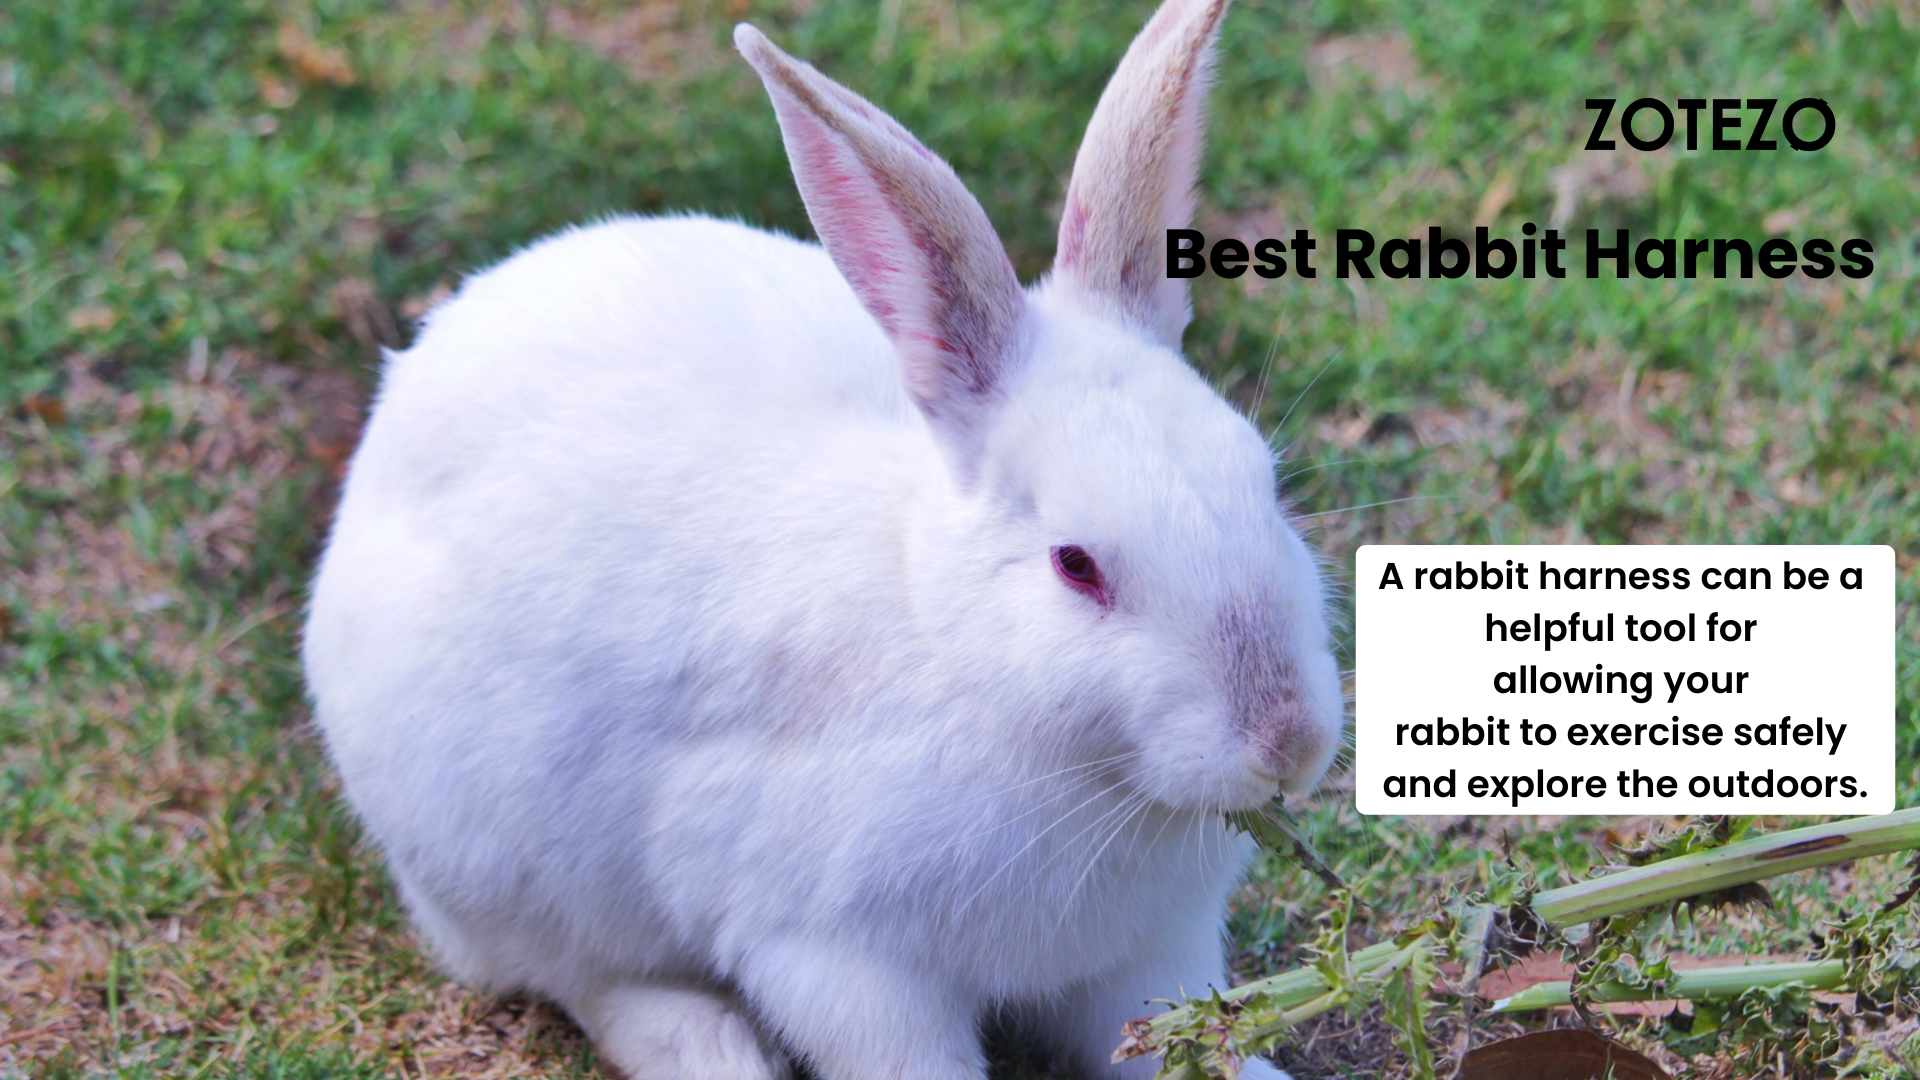 Rabbit Harness in the World